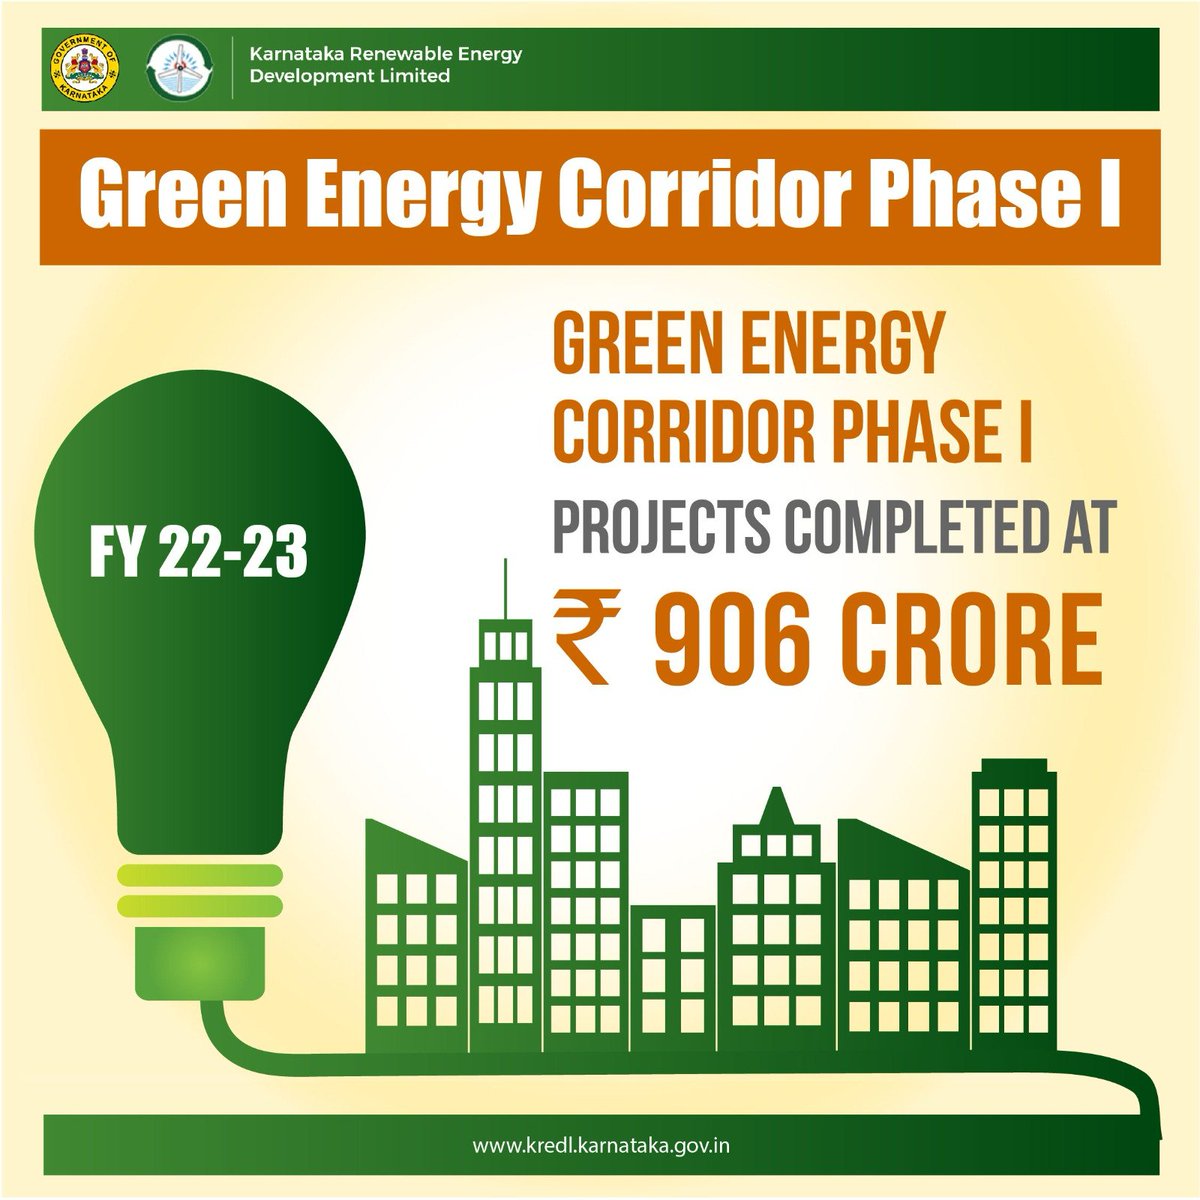 Green Corridor Energy Phase I projects completed at Rs. 906 crore in FY 22-23, marking a significant milestone in Karnataka's renewable energy journey. A testament to our commitment towards a sustainable future. #RenewableEnergy #GreenCorridorSuccess